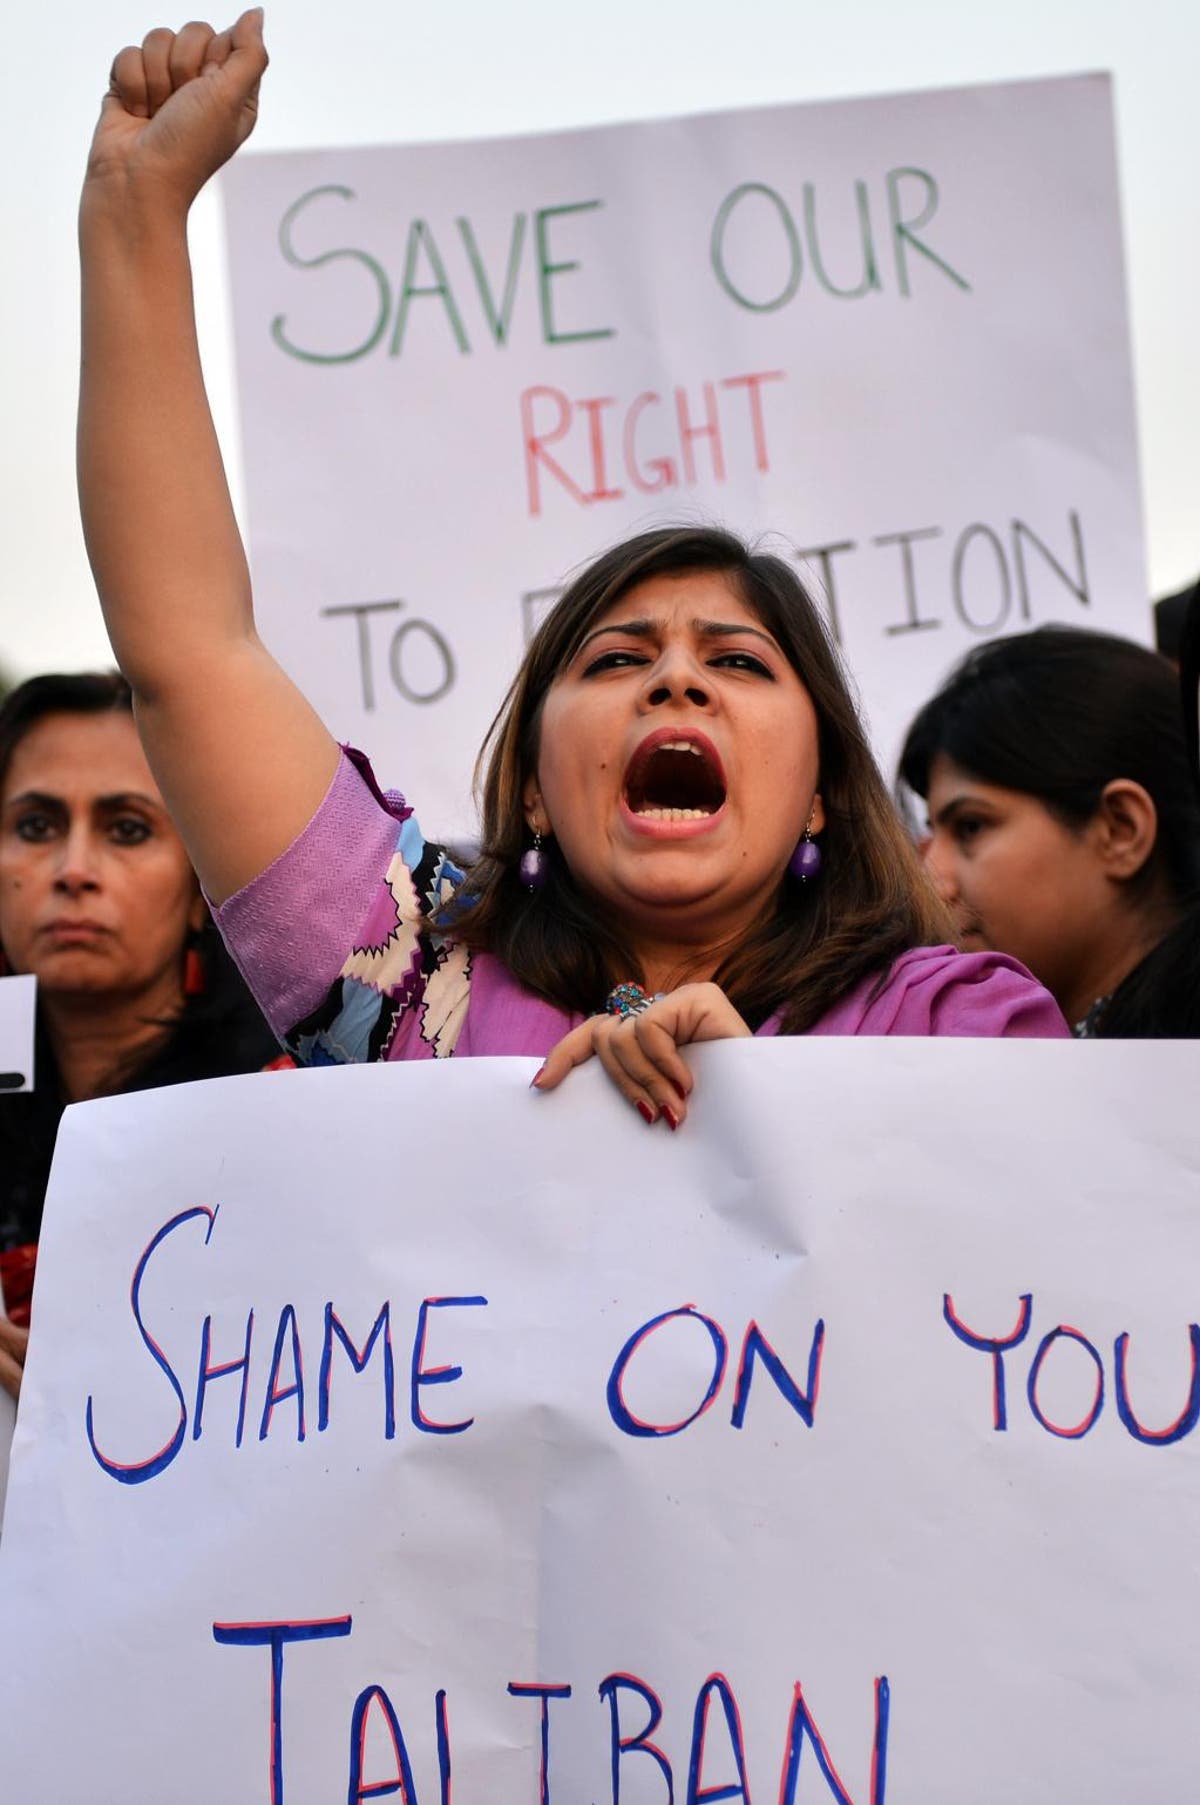 Shooting Of Female Teen Activist Prompts Pakistani Outcry Against